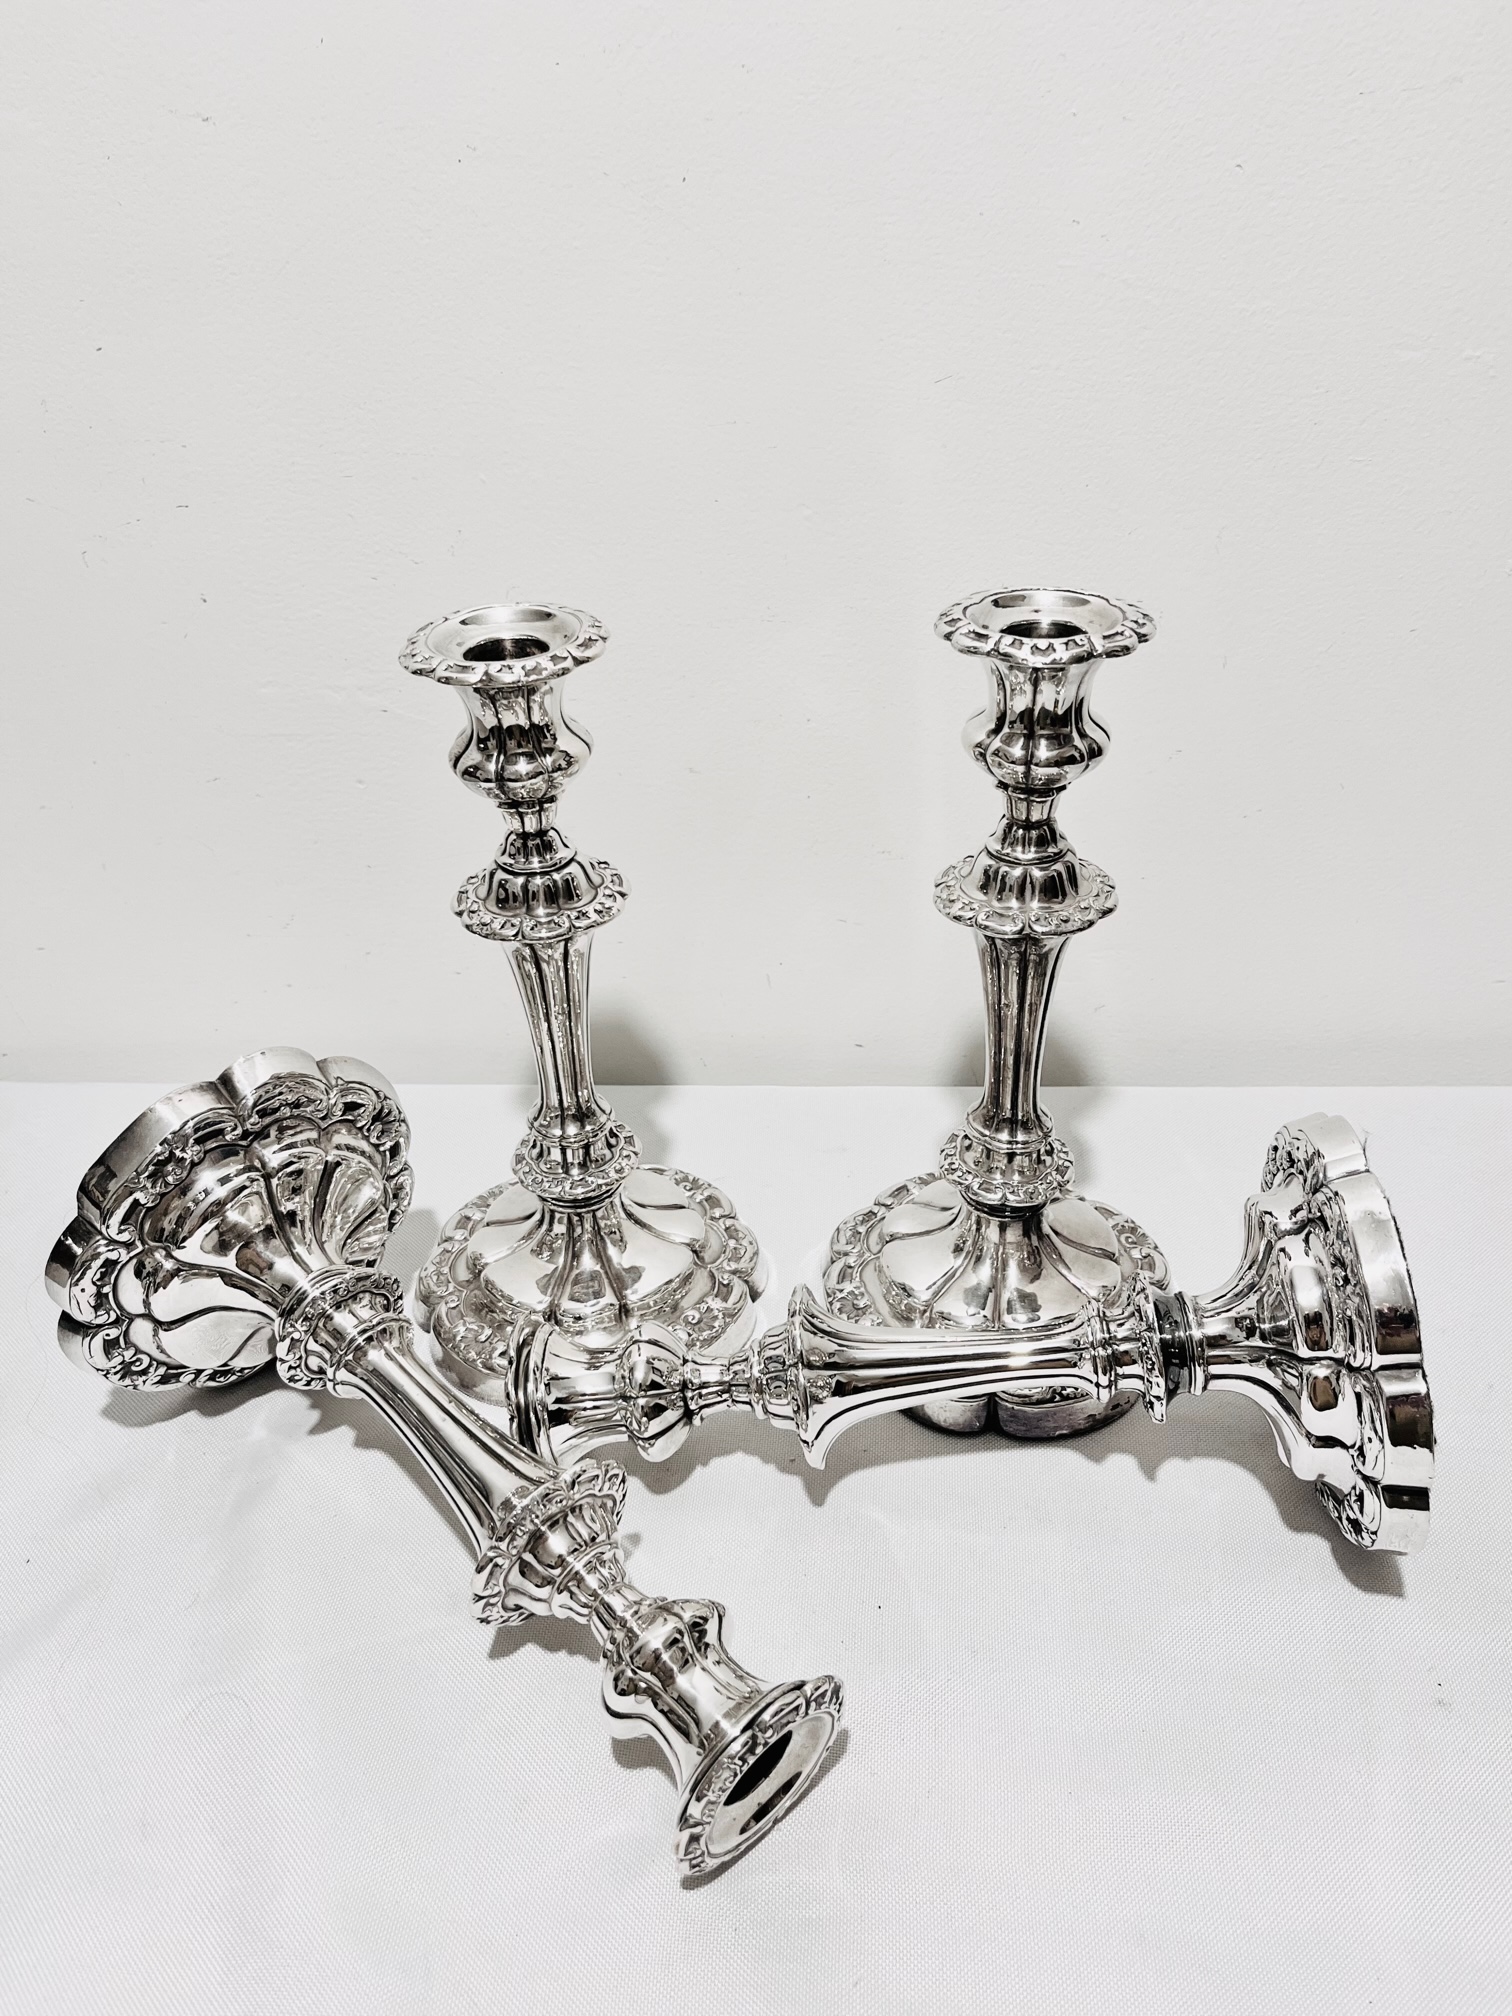 Set of Four Antique Silver Plated Candlesticks